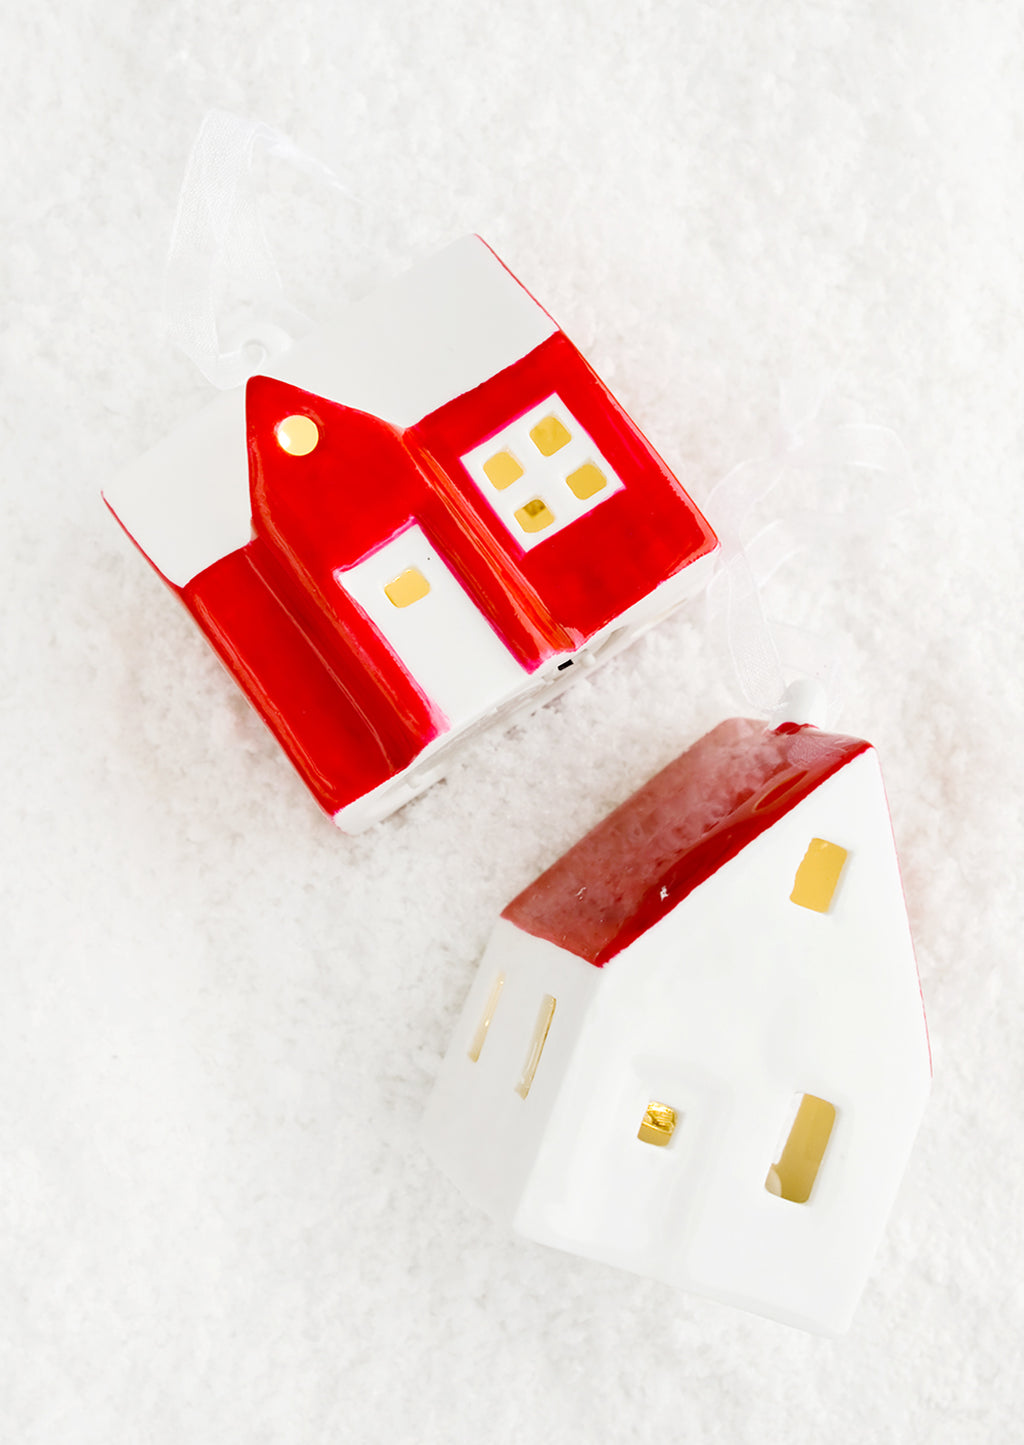 2: A ceramic christmas ornament in the shape of a farmhouse painted in red and white with interior lights.